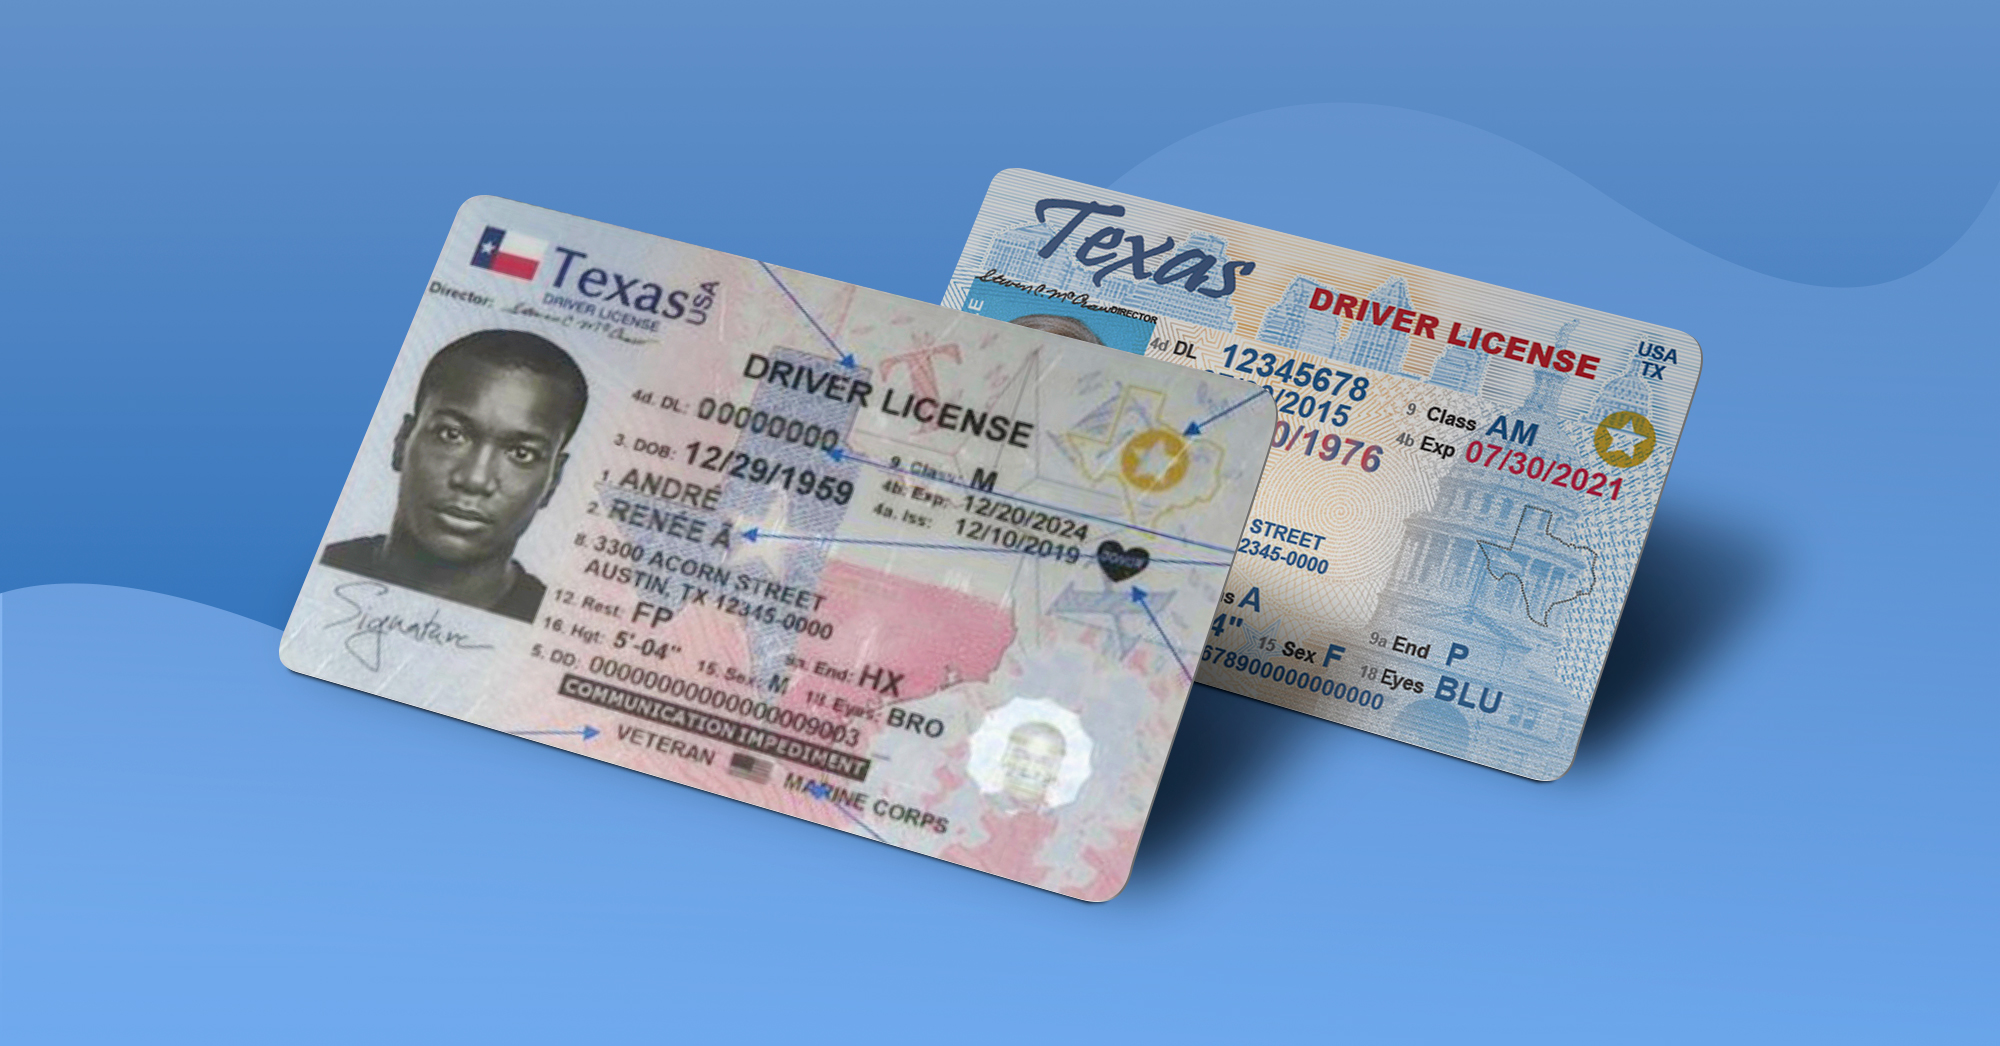 how to order a new driver's license texas